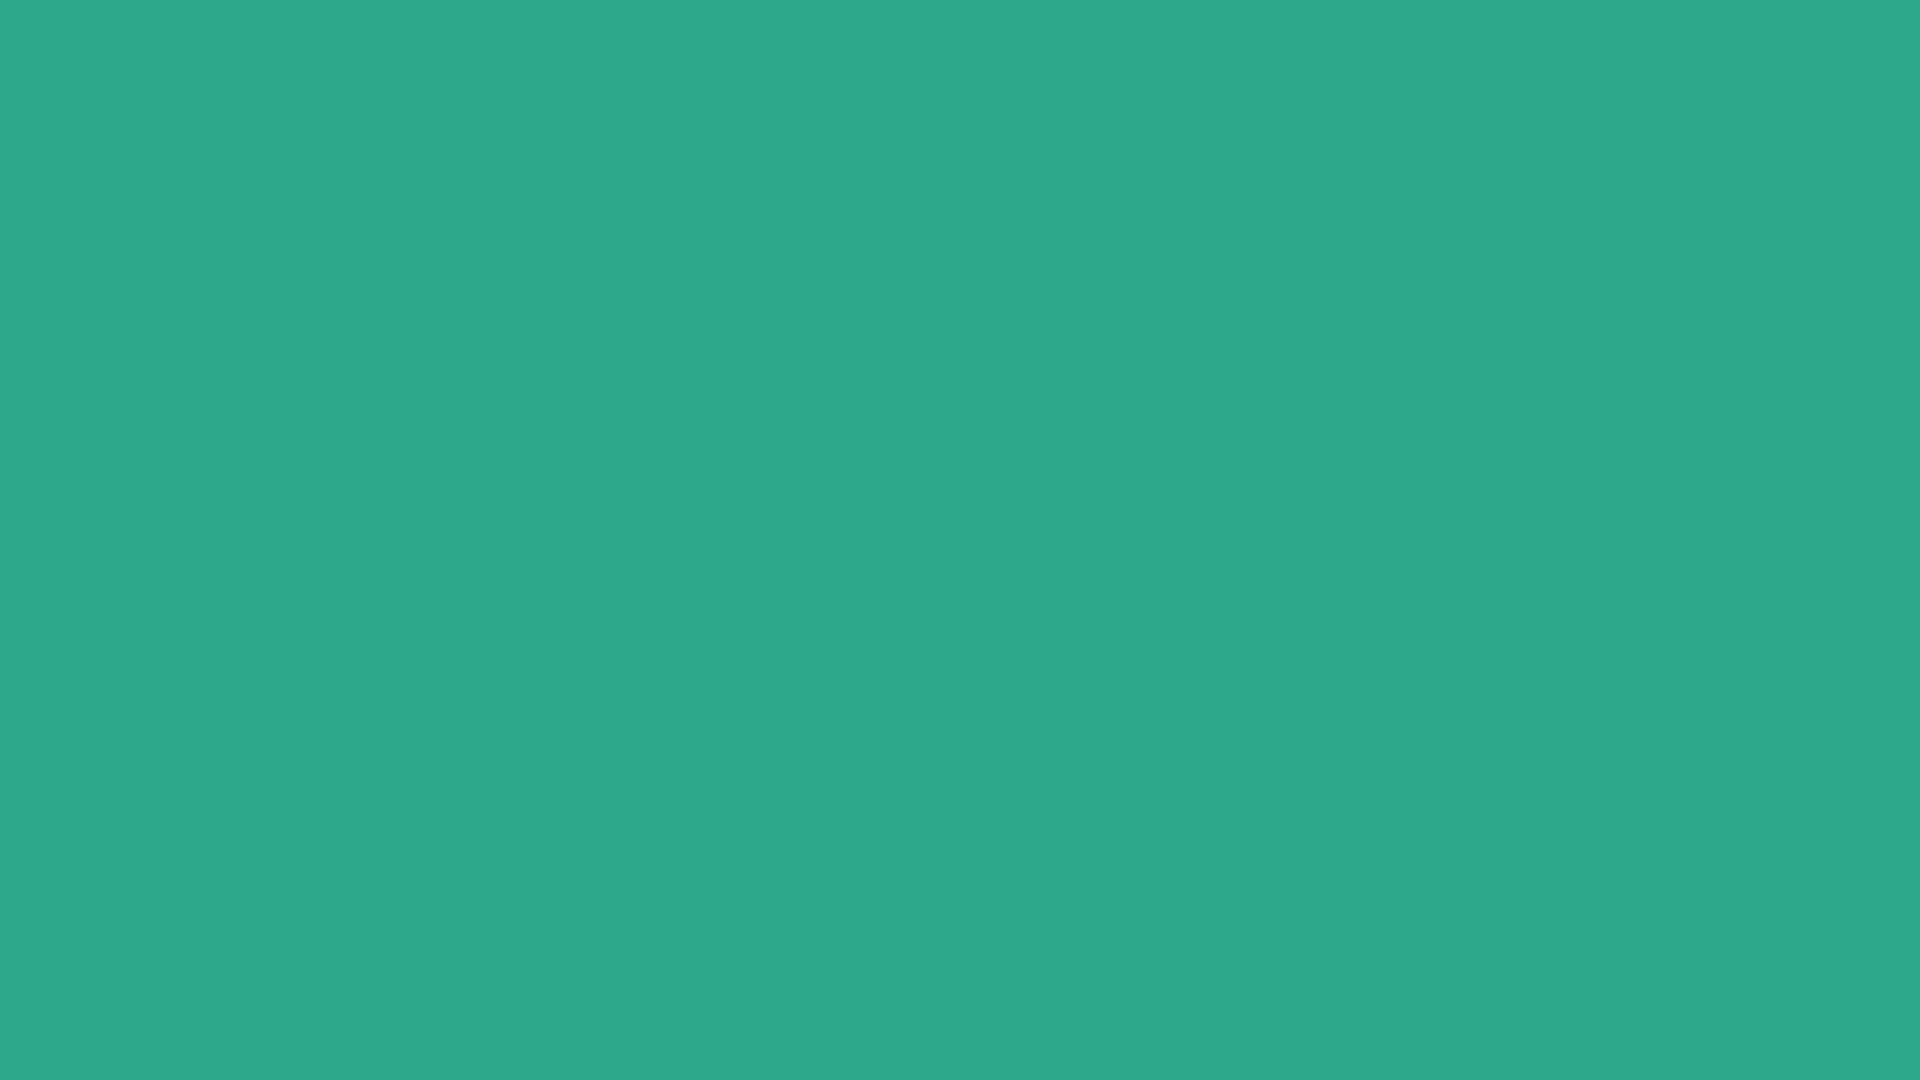 https://htmlcolorcodes.com/assets/images/colors/jungle-green-color-solid-background-1920x1080.png